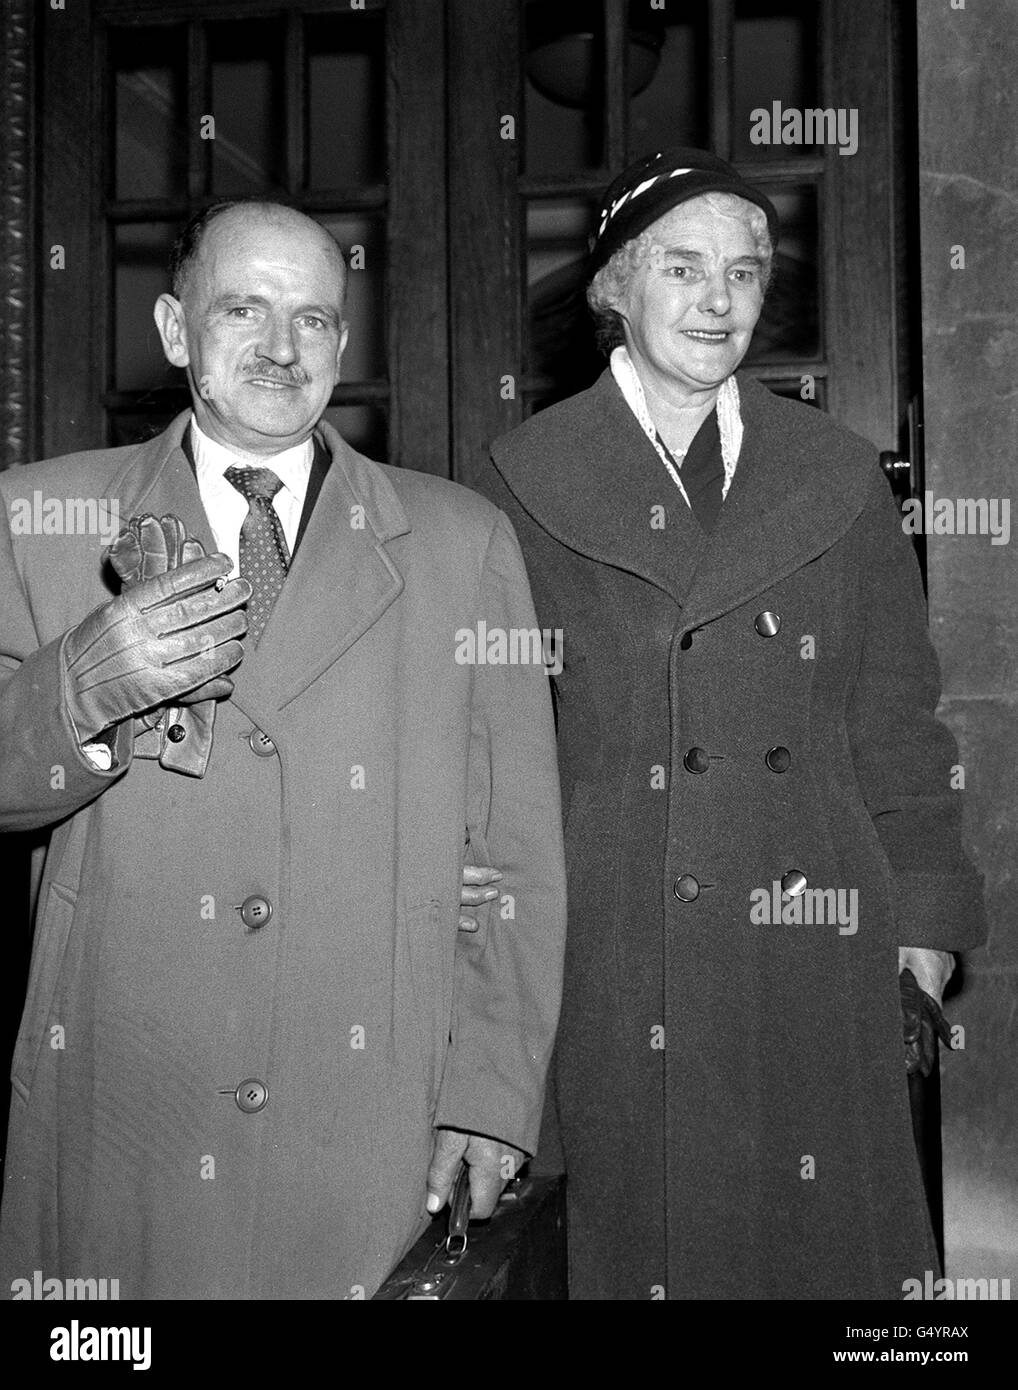 Alexander Gordon Bonnyman, jailed for a year for the manslaughter of his first wife bu neglect in 1942, with his second wife in London, after attending a public sitting of the General Medical Council Disciplinary Committee, at which his name was restored. *after a period of 18 years. Stock Photo